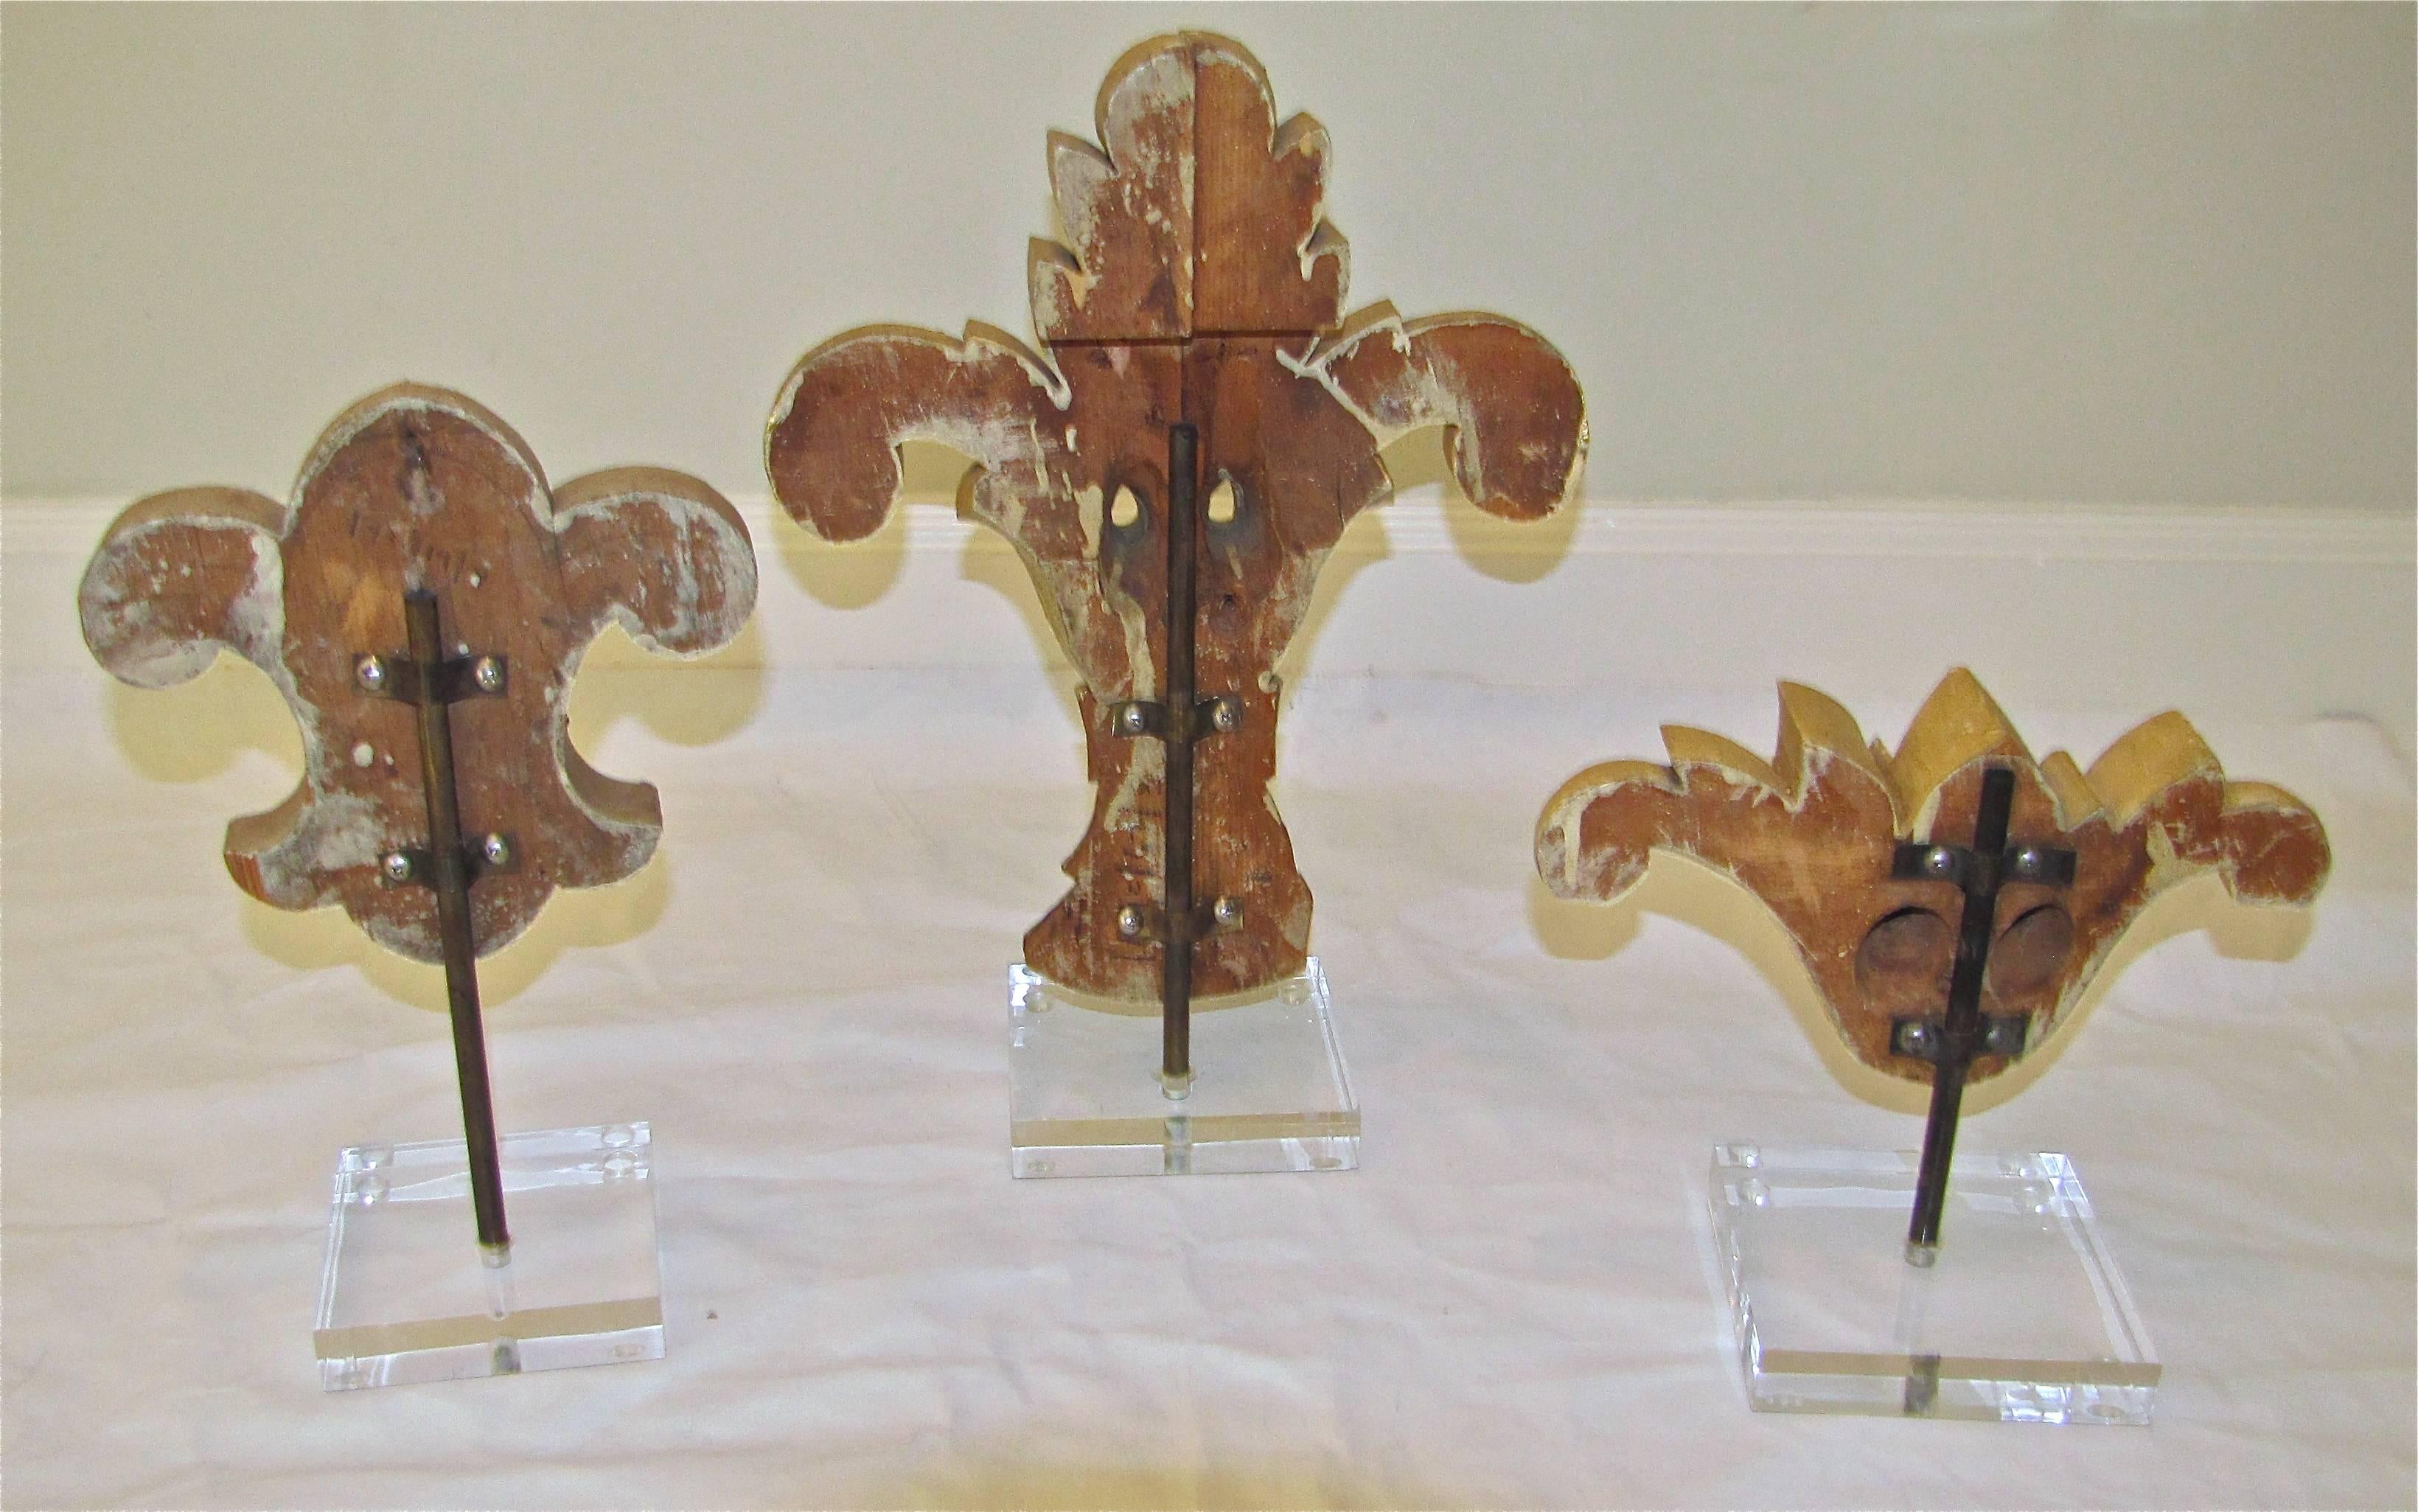 Architectural Carved Wood Fragments Mounted Acrylic Stands 4